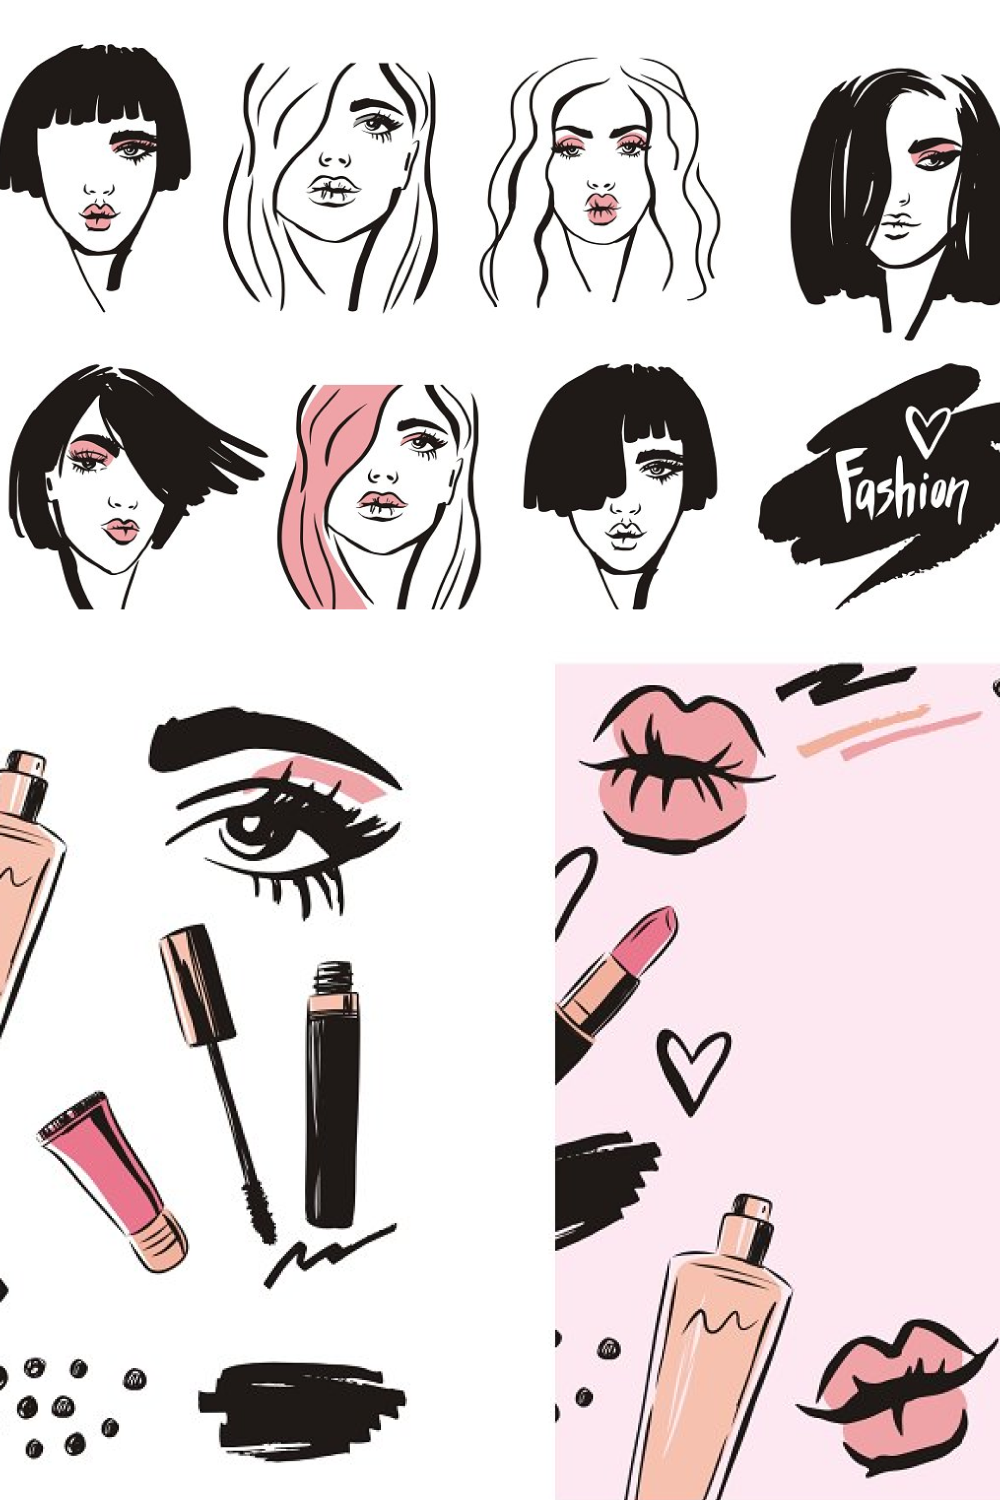 Mascara, lipstick, shadows and other women's makeup items.